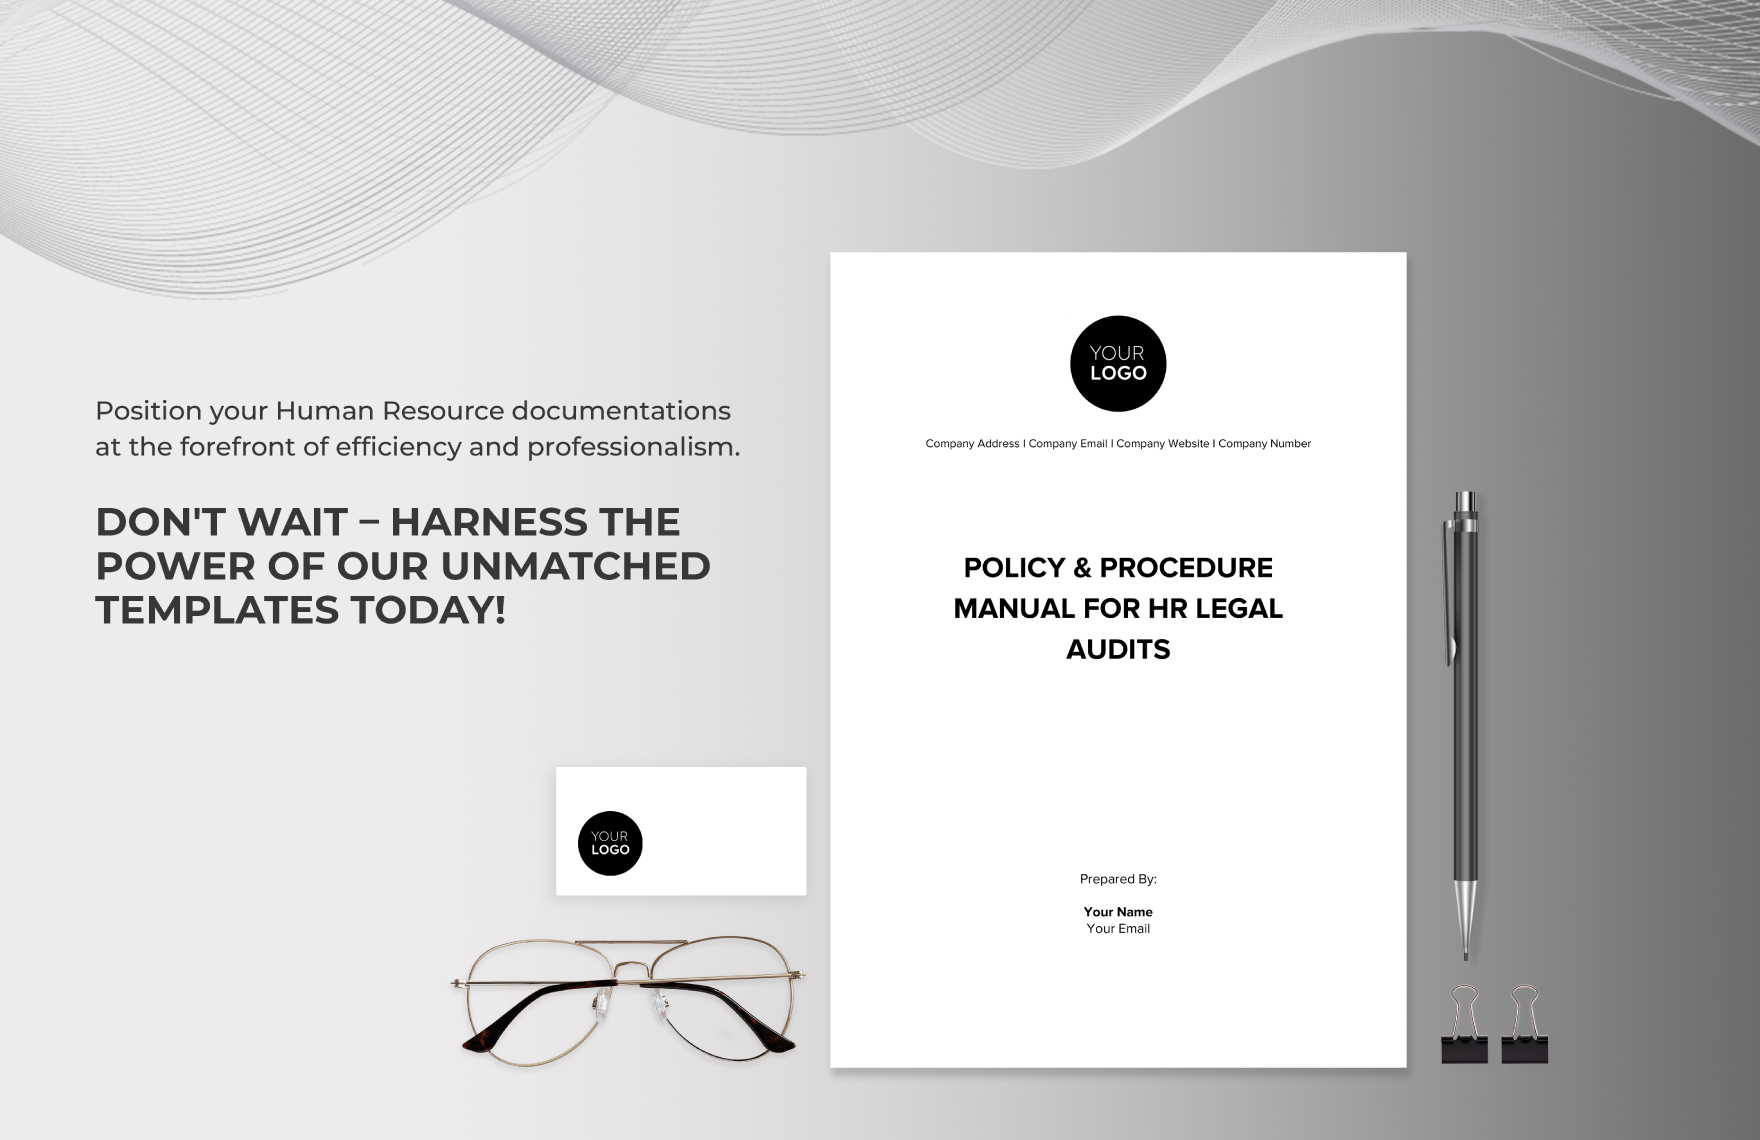 Policy & Procedure Manual for HR Legal Audits Template